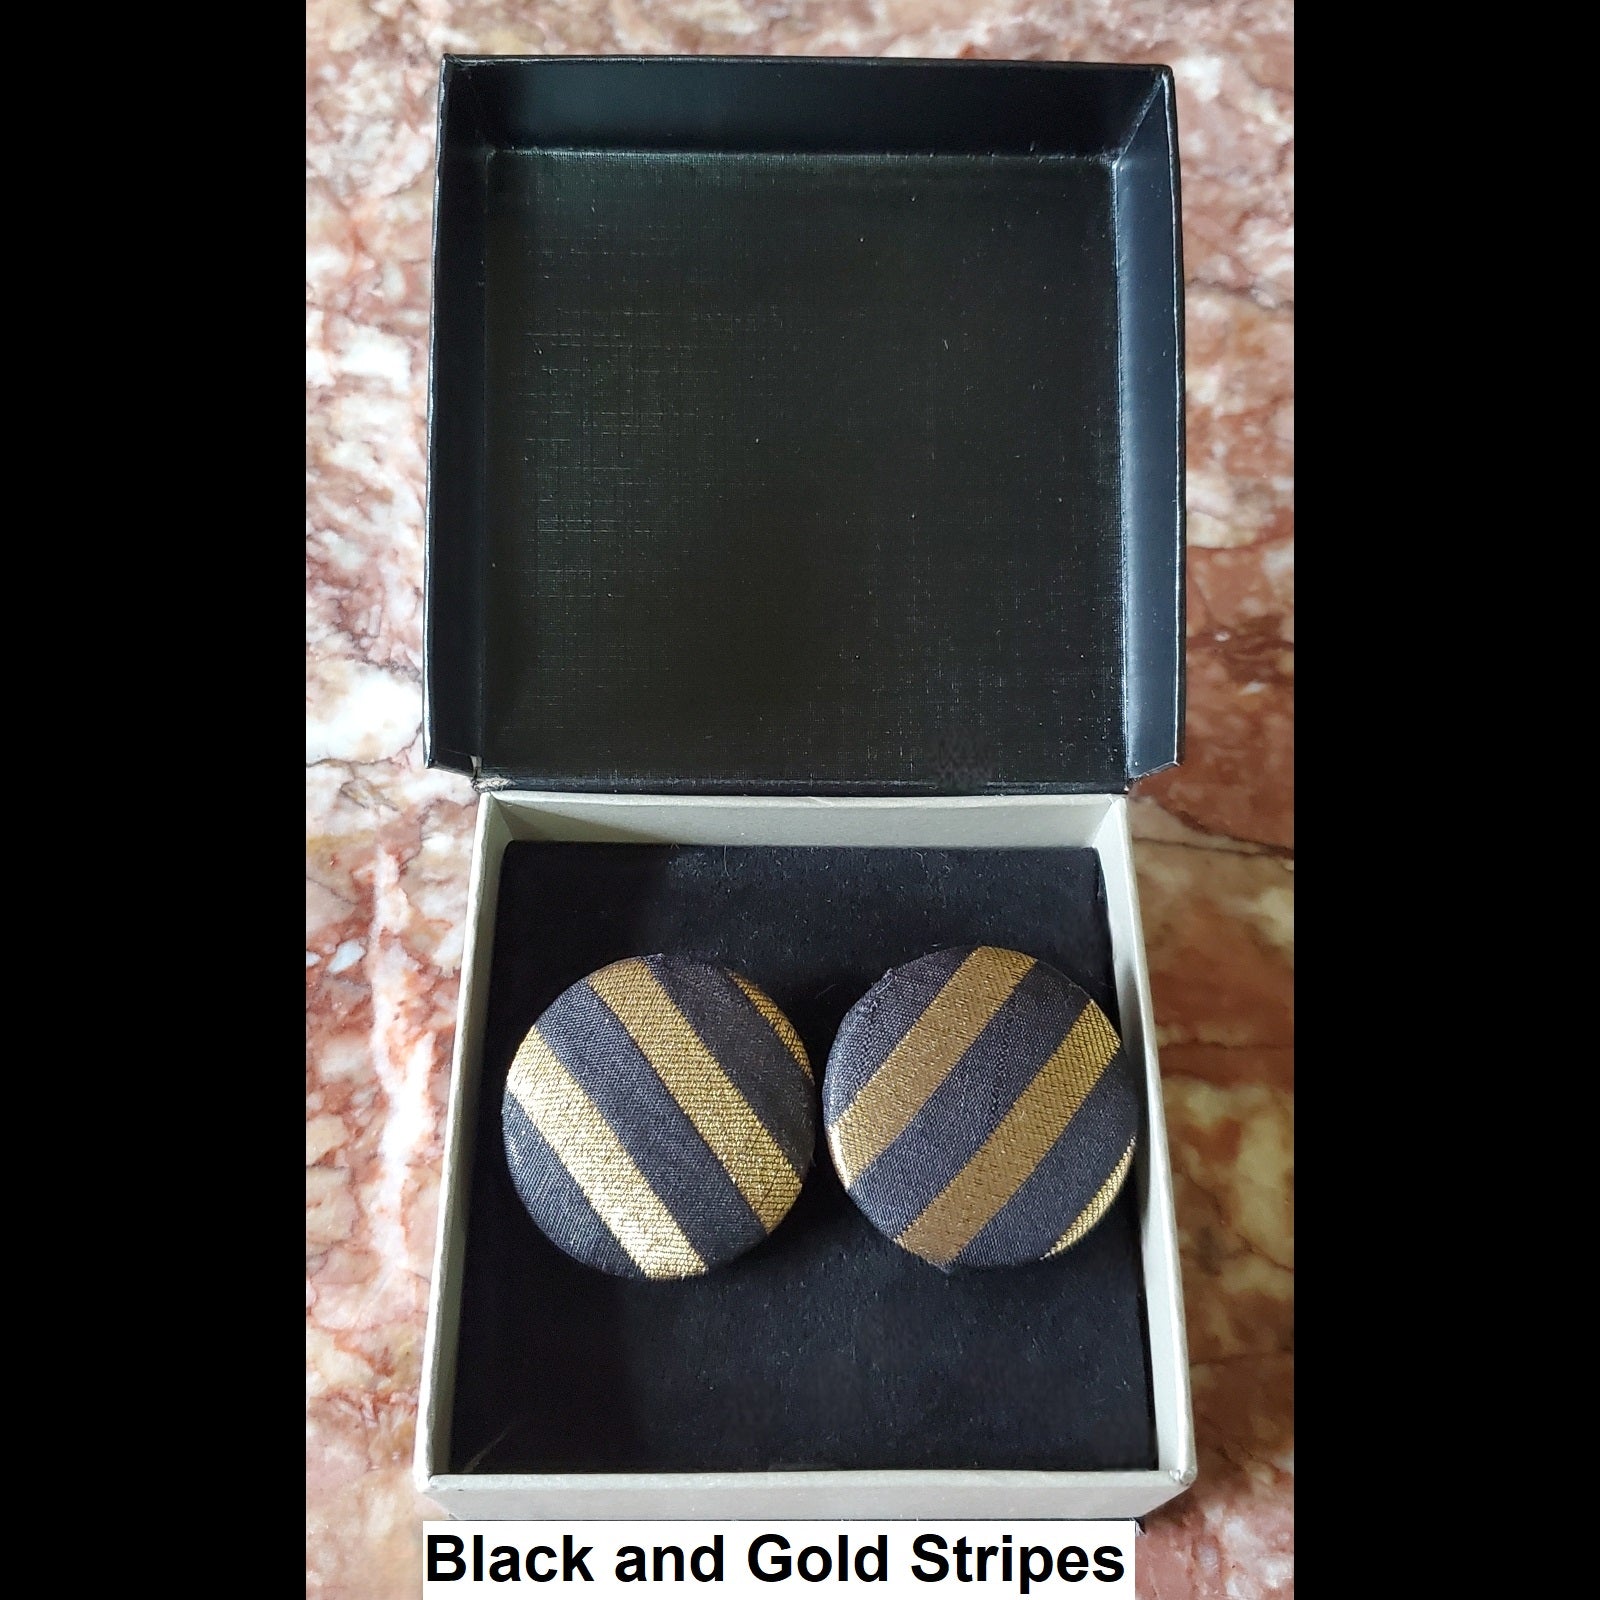 Black and gold stripe button earrings in jewelry box 